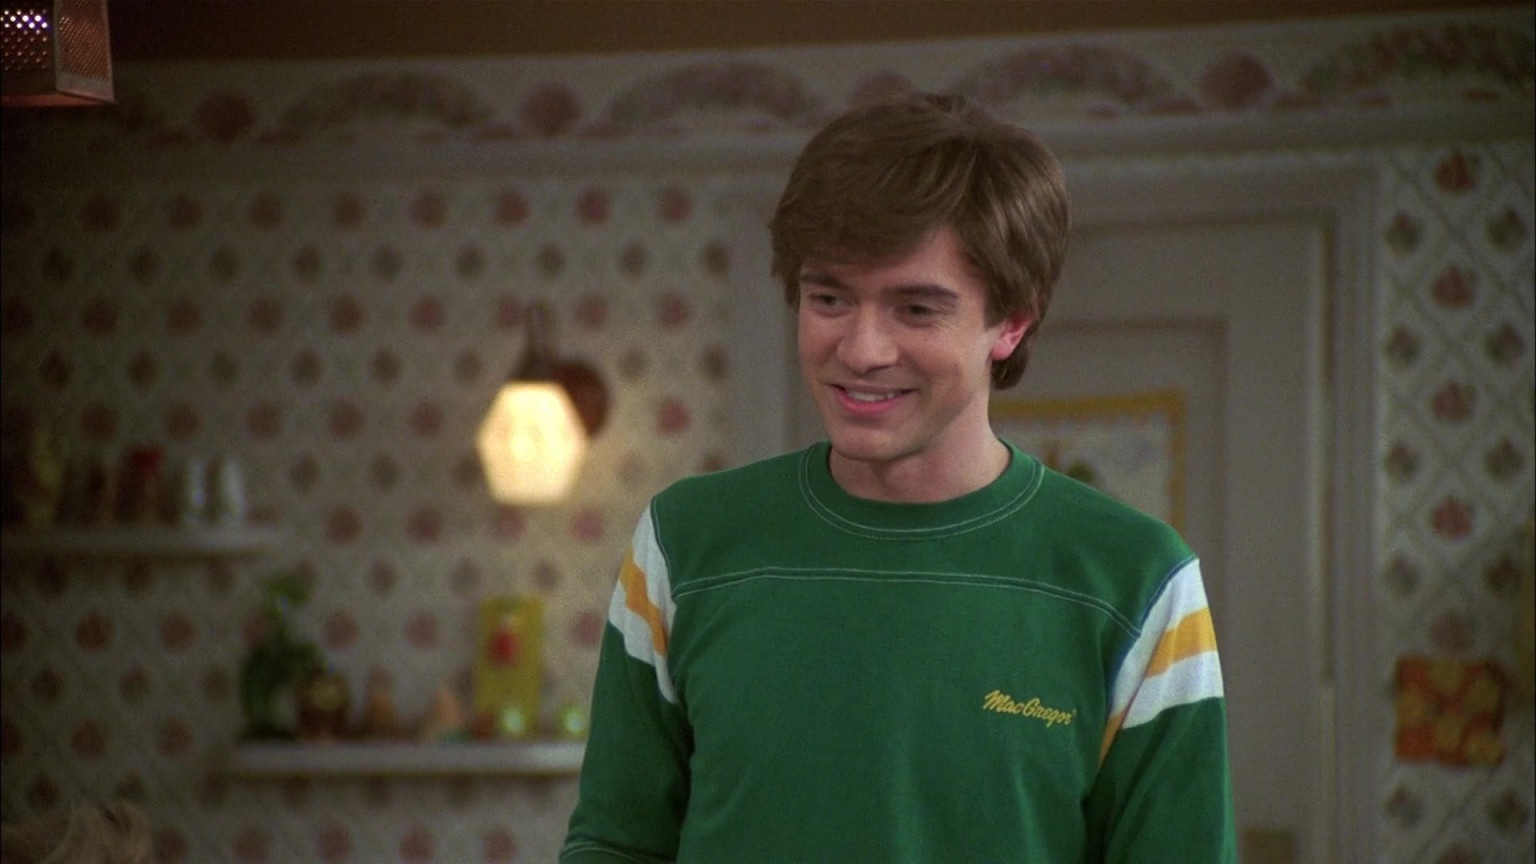 macgregor-green-t-shirt-of-topher-grace-as-eric-forman-in-that-70s